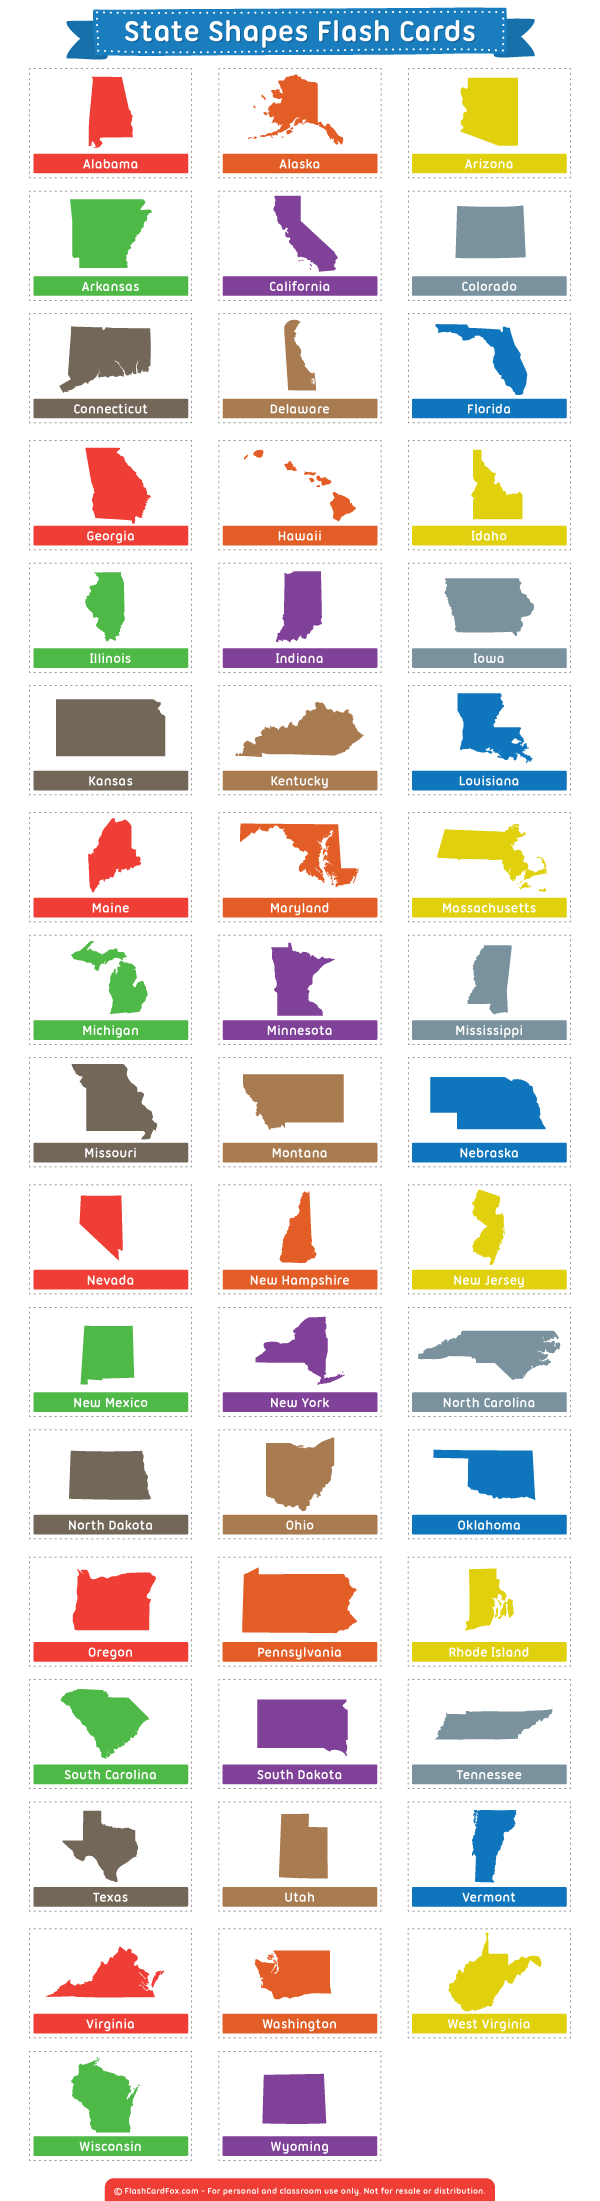 printable-state-shapes-flash-cards